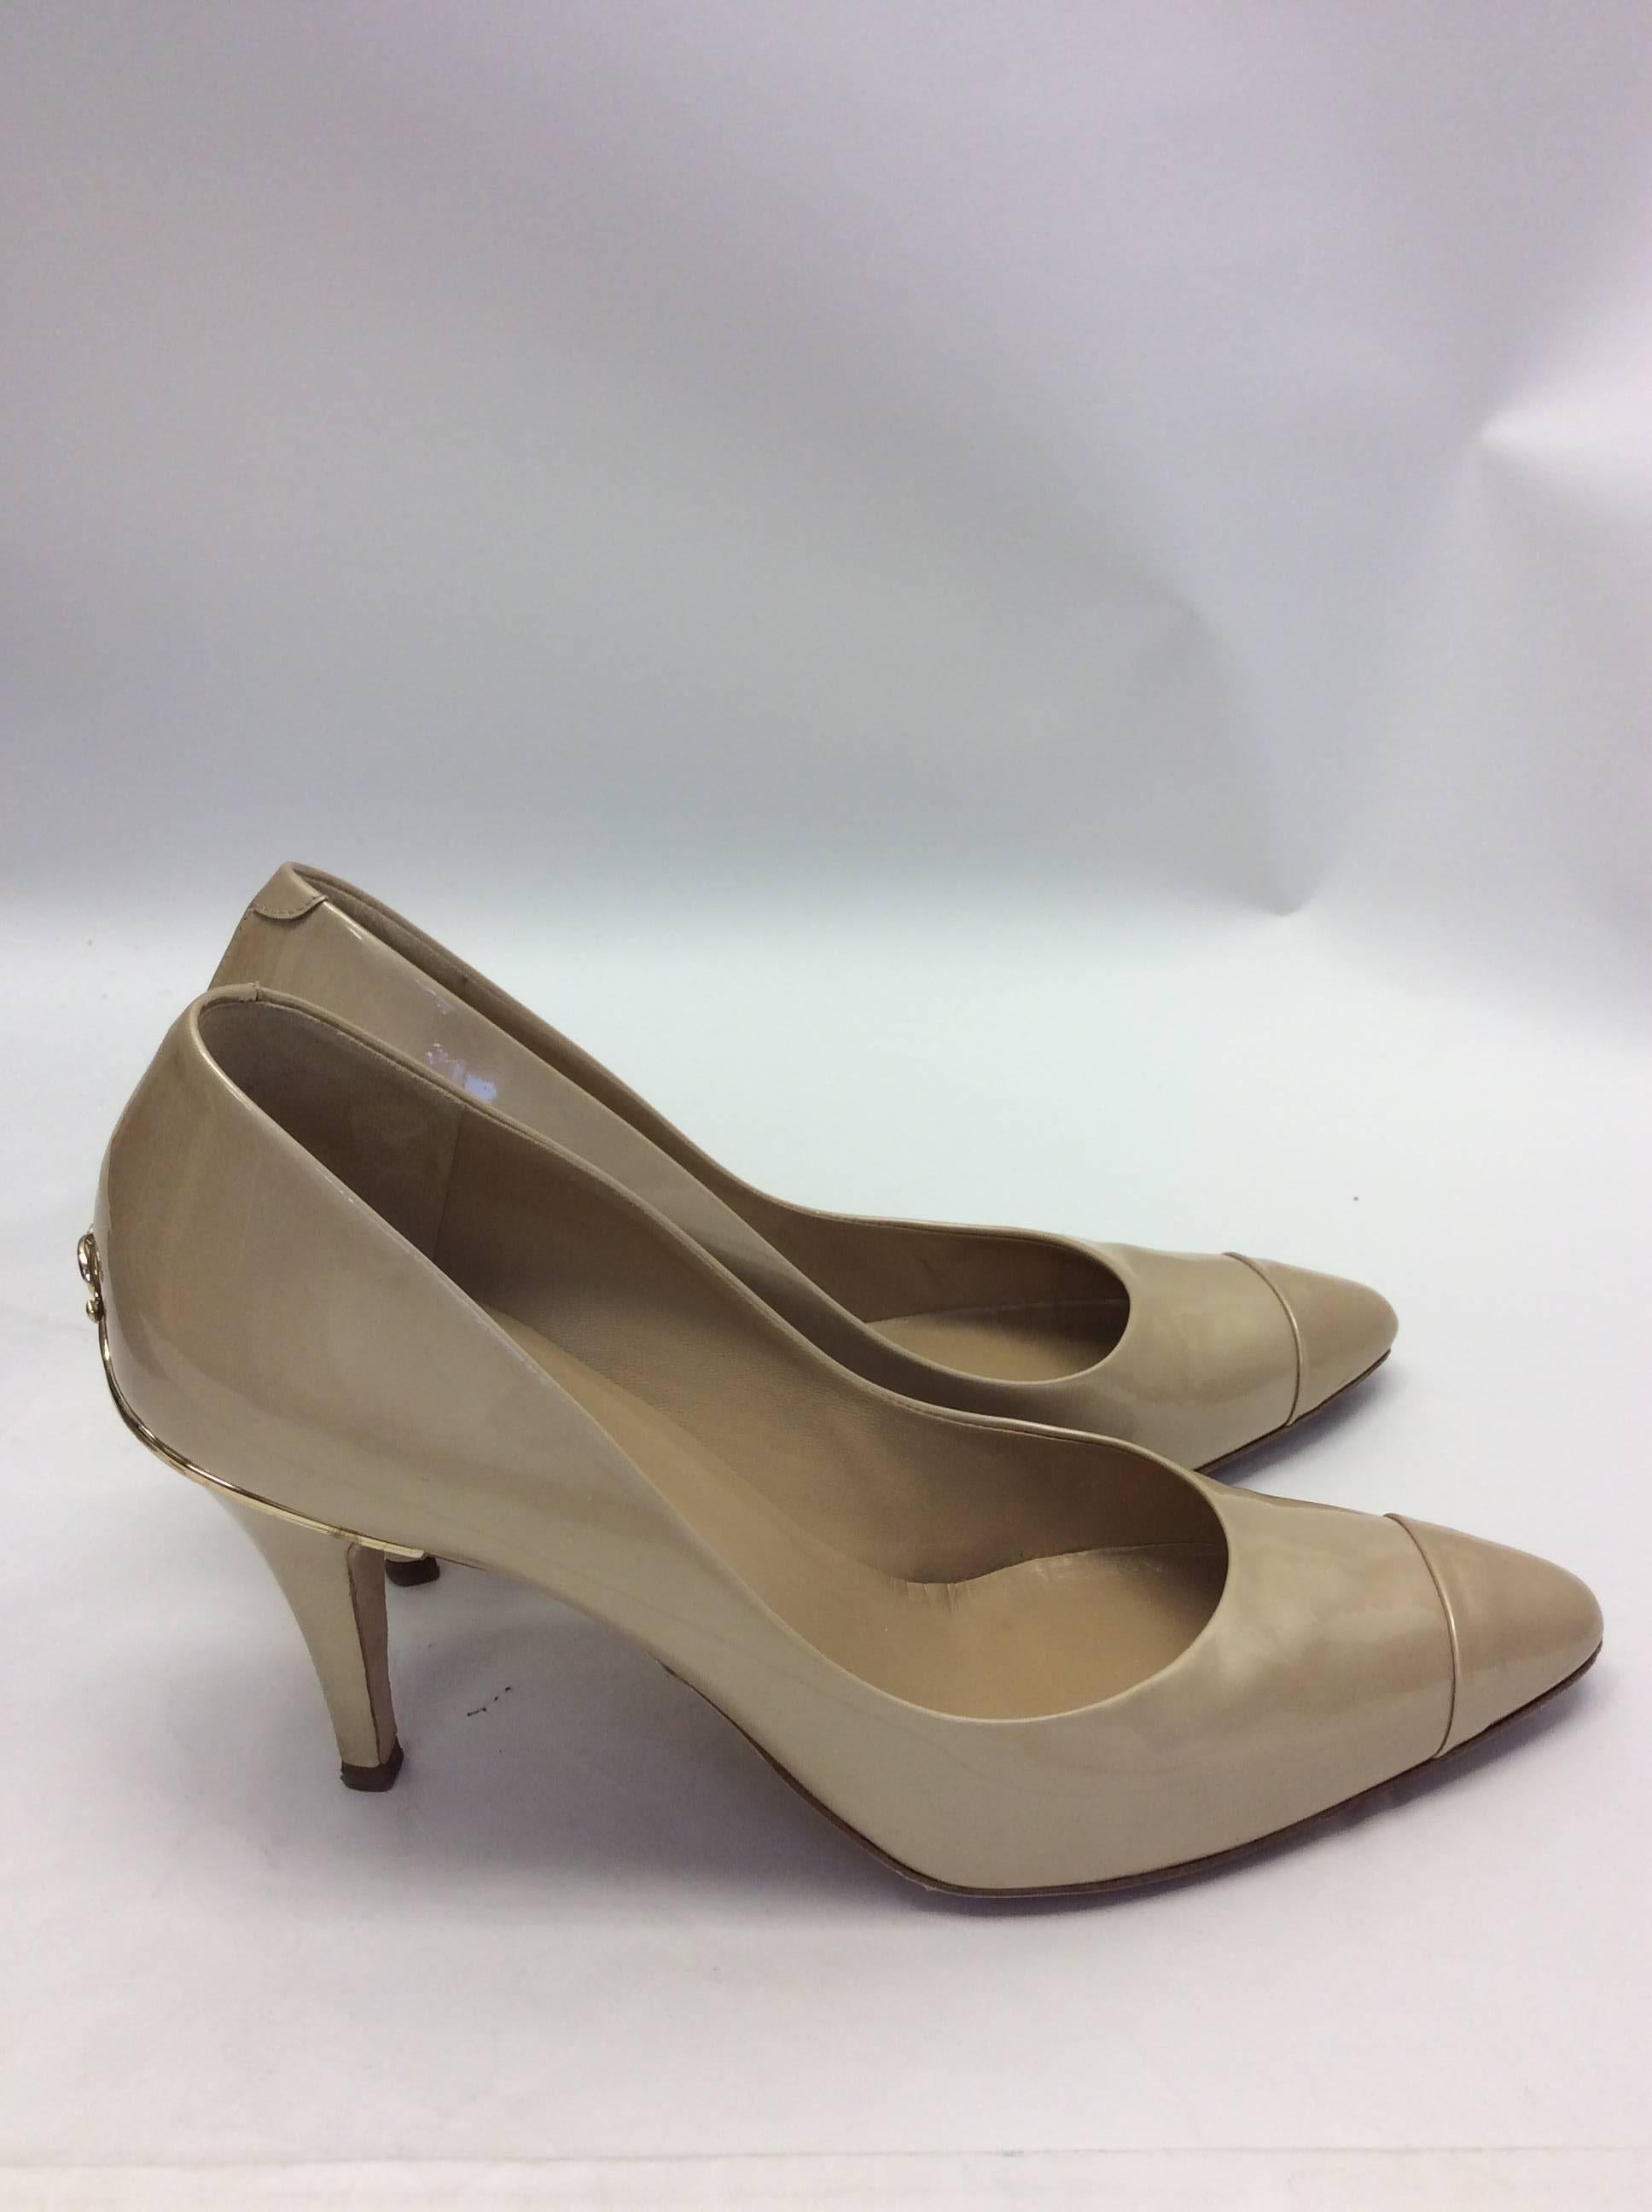 Chanel Patent Leather Cream Pumps In Excellent Condition For Sale In Narberth, PA